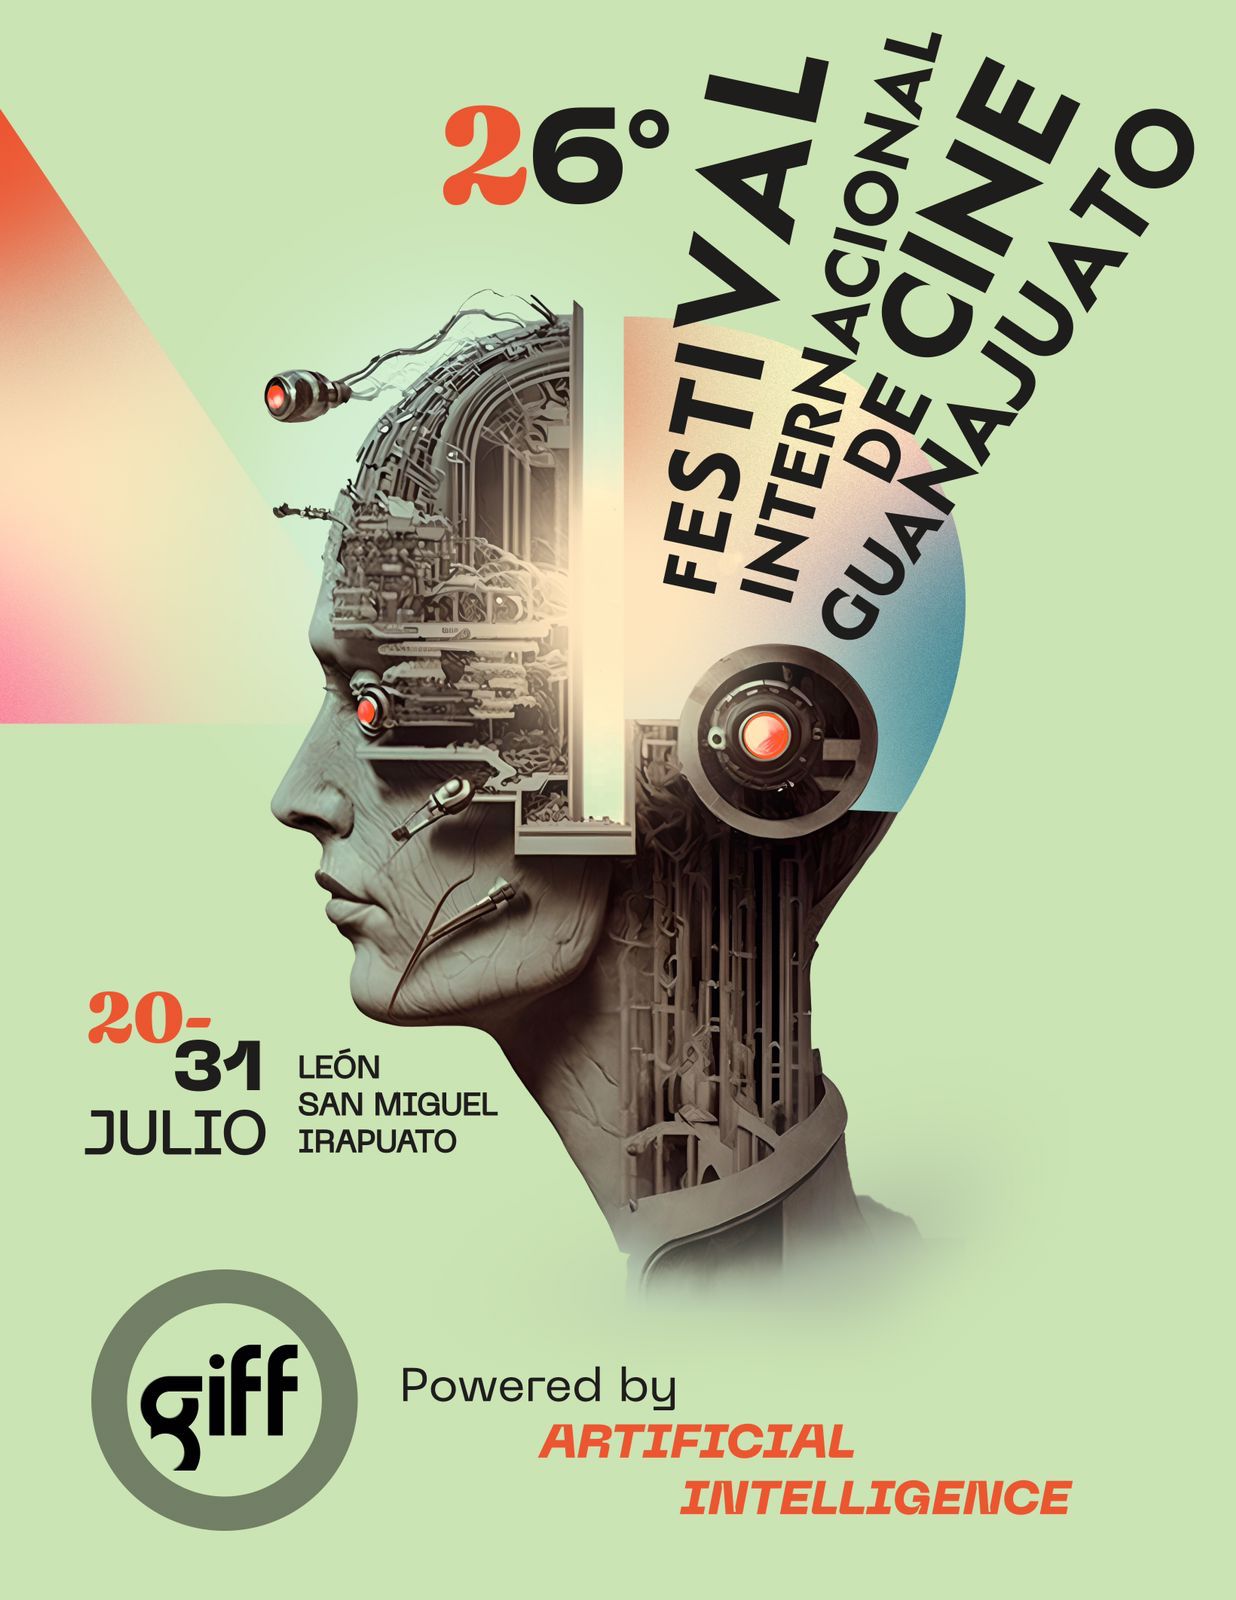 GIFF POWERED BY AI